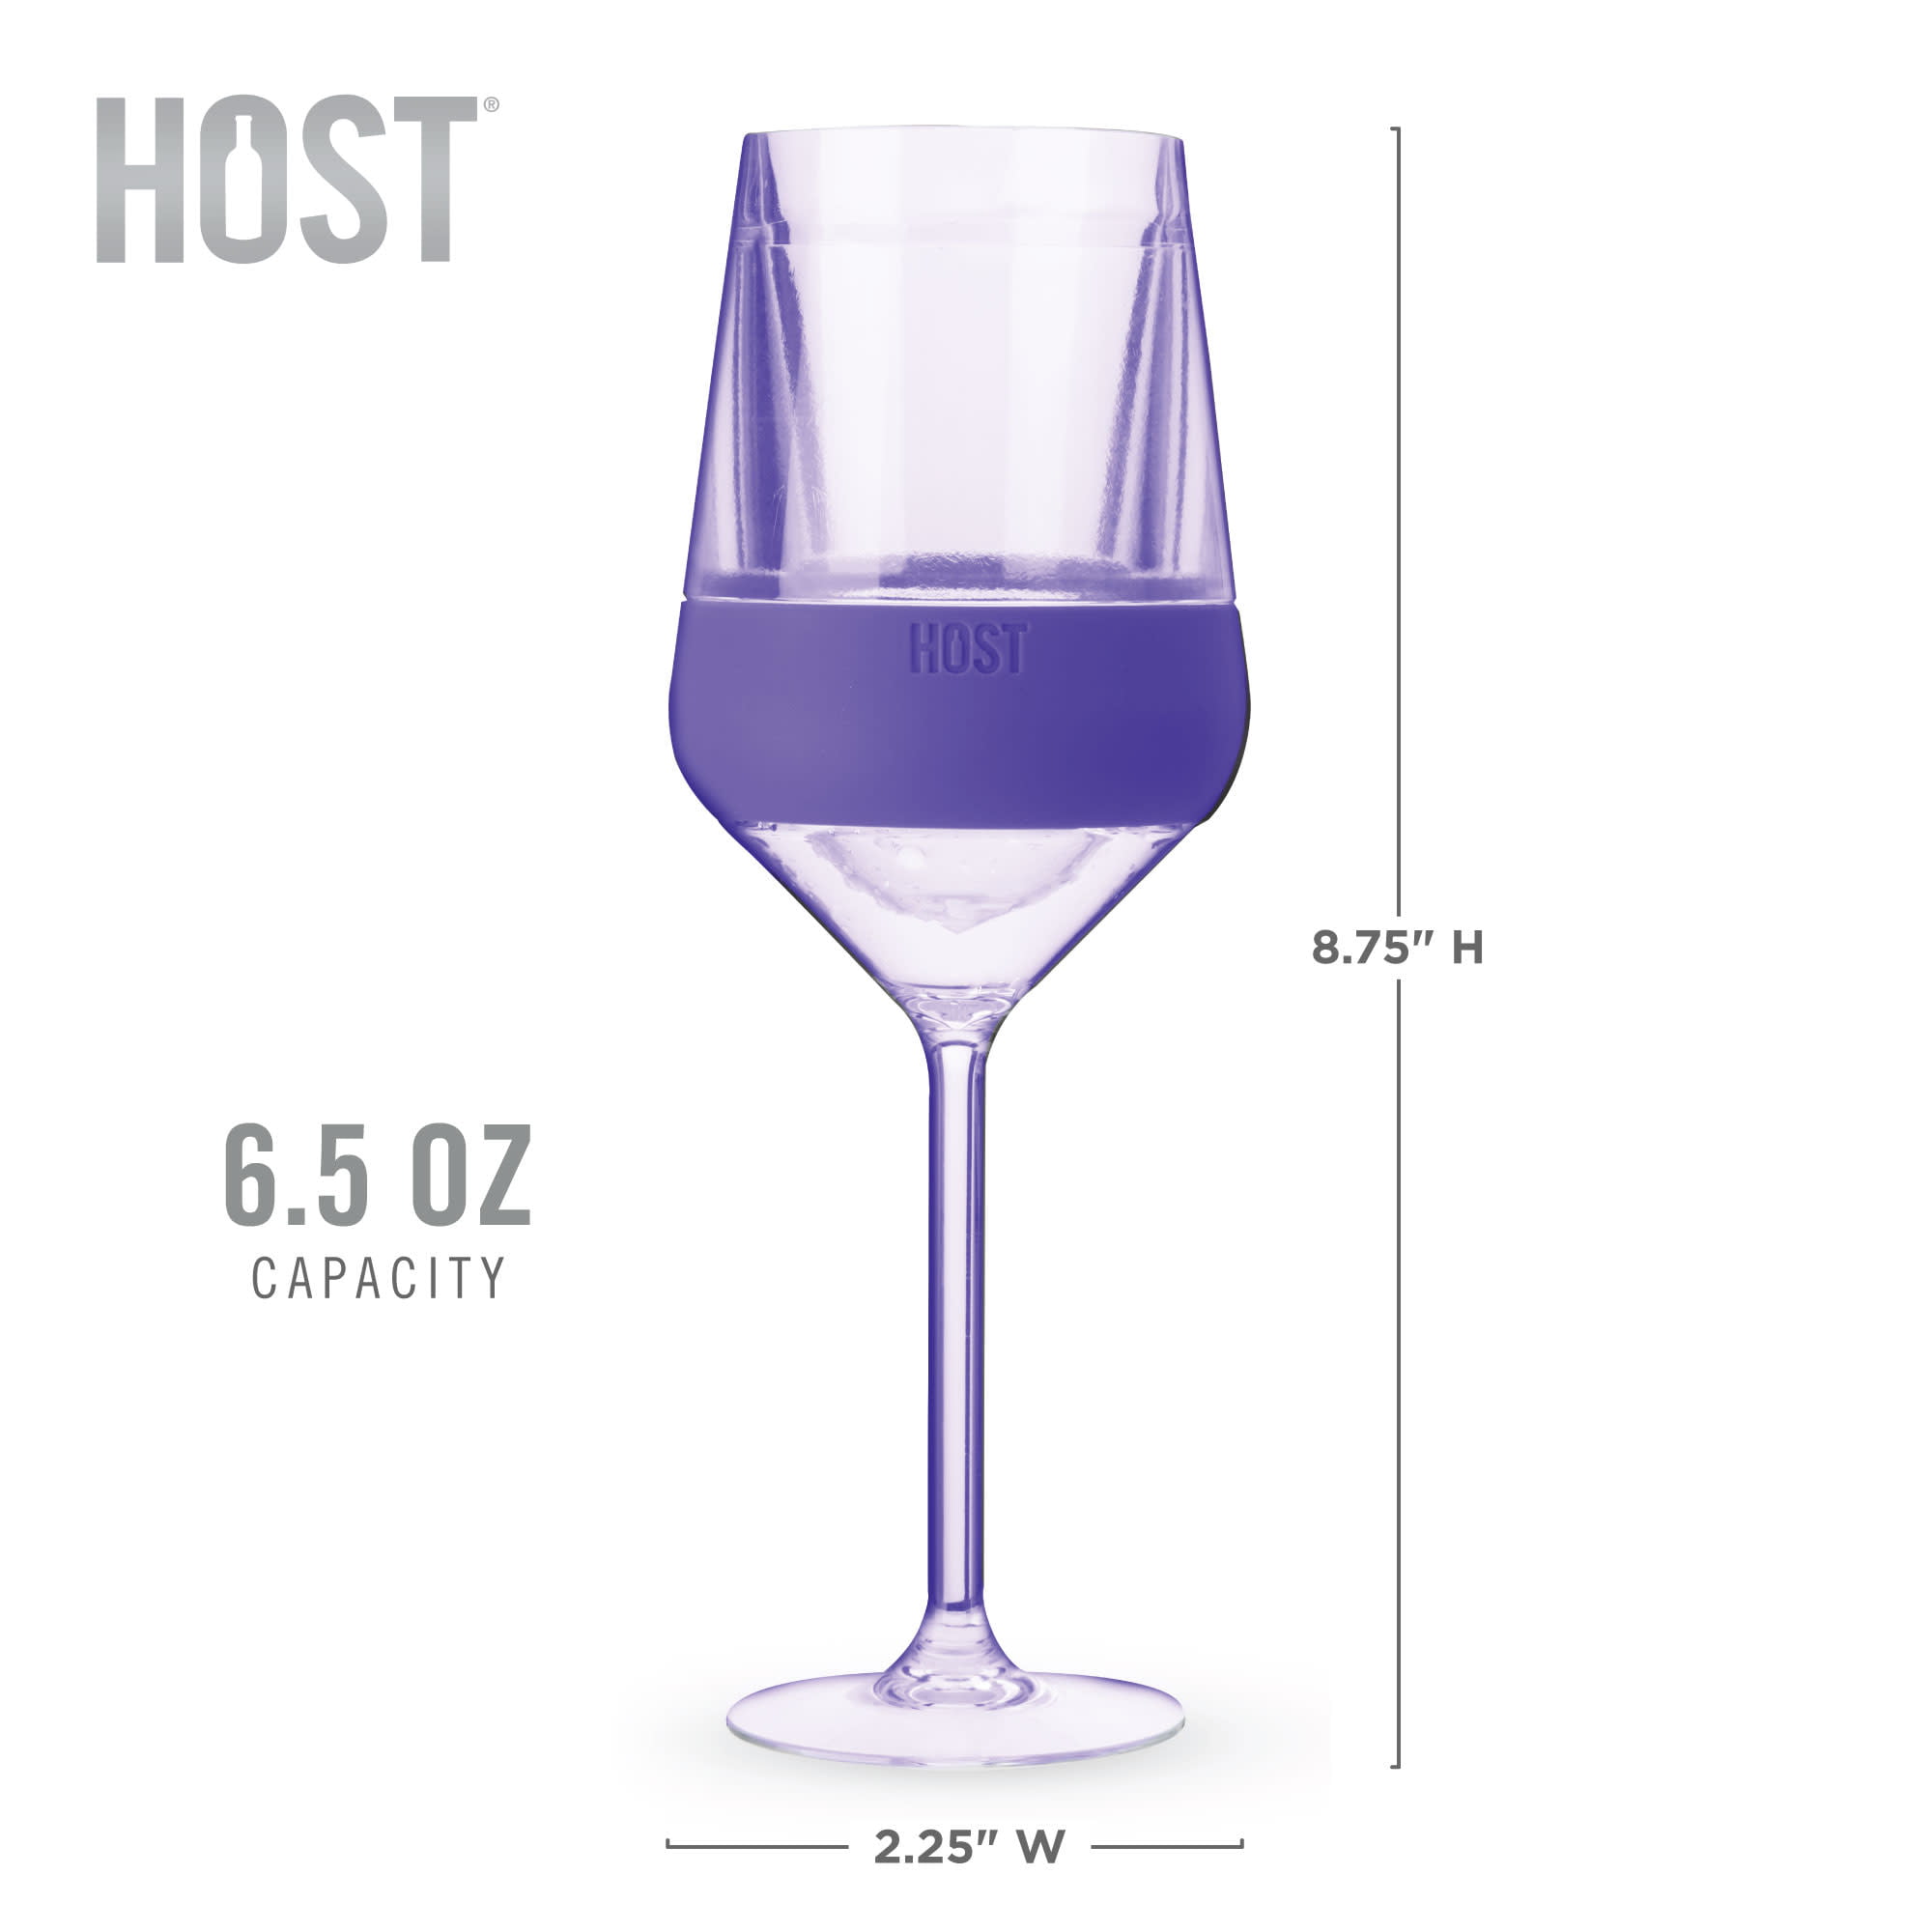 Host Wine Freeze XL Double-Walled Stemless Glasses Freezer Cooling Cups  with Active Gel and Insulated Silicone Grip, 12 Oz Plastic Tumblers, Set of  1, Mint 